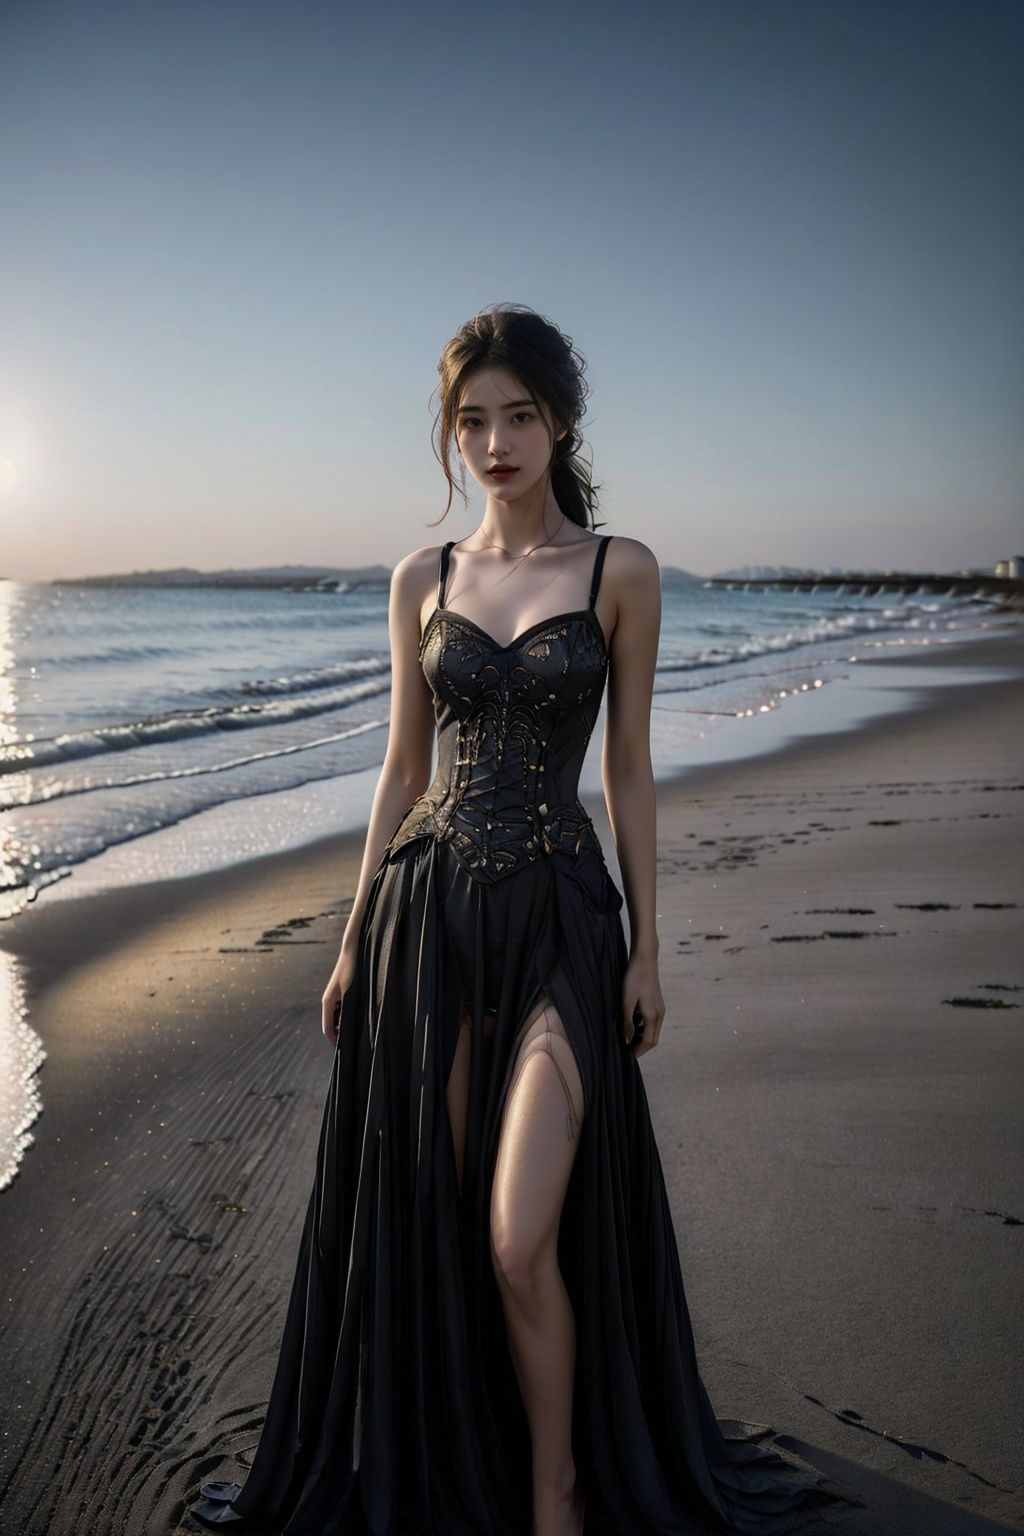  ((masterpiece)), ((best quality)), 8k, high detailed, ultra-detailed, (20-year-old girl), (dress), (strap dress), (on the beach), (solo), (seaside), (sunset), (golden hour), (ocean waves), (sand), (serenity).cuihua,heigirl